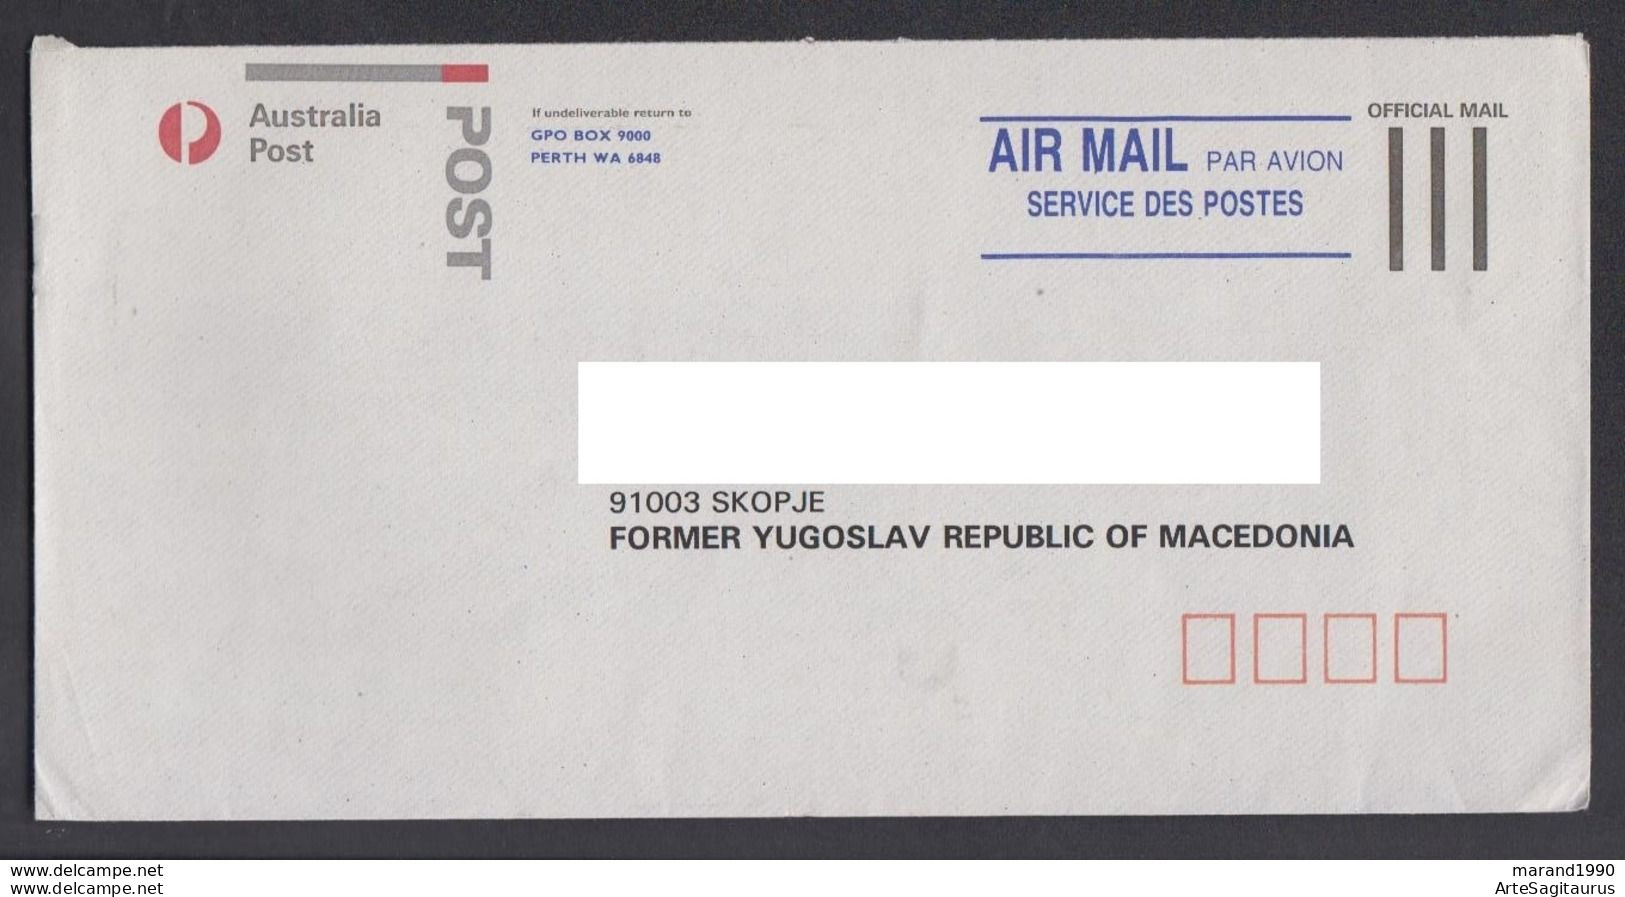 AUSTRALIA AIR MAIL OFFICIAL MAIL MACEDONIA  (007) - Service